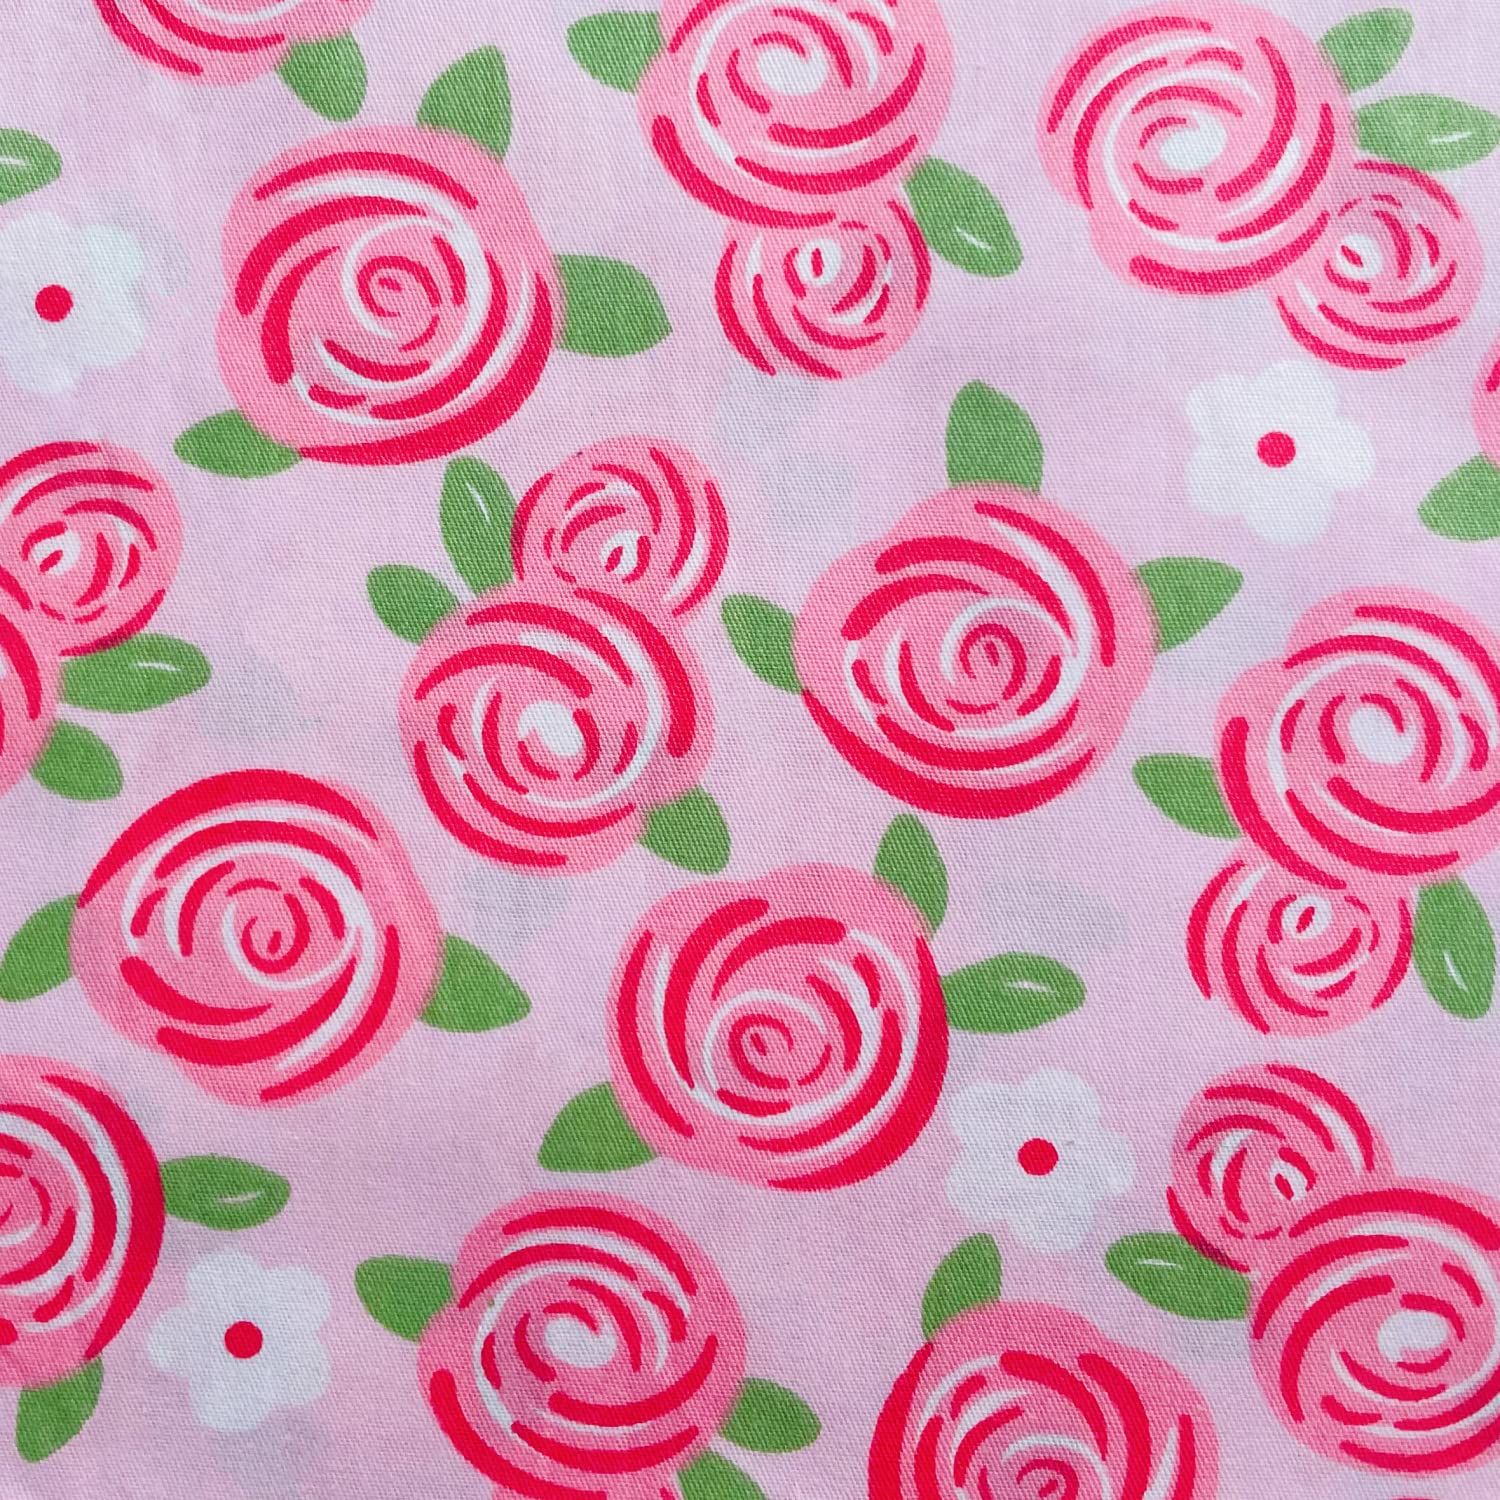 Pink Charm Packs for Quilting 5 inch, Rose Fabric Precut Quilting Fabric Squares 5x5 for Baby Girls 100% Cotton Fabric for Sewing DIY Patchwork (42Pcs)